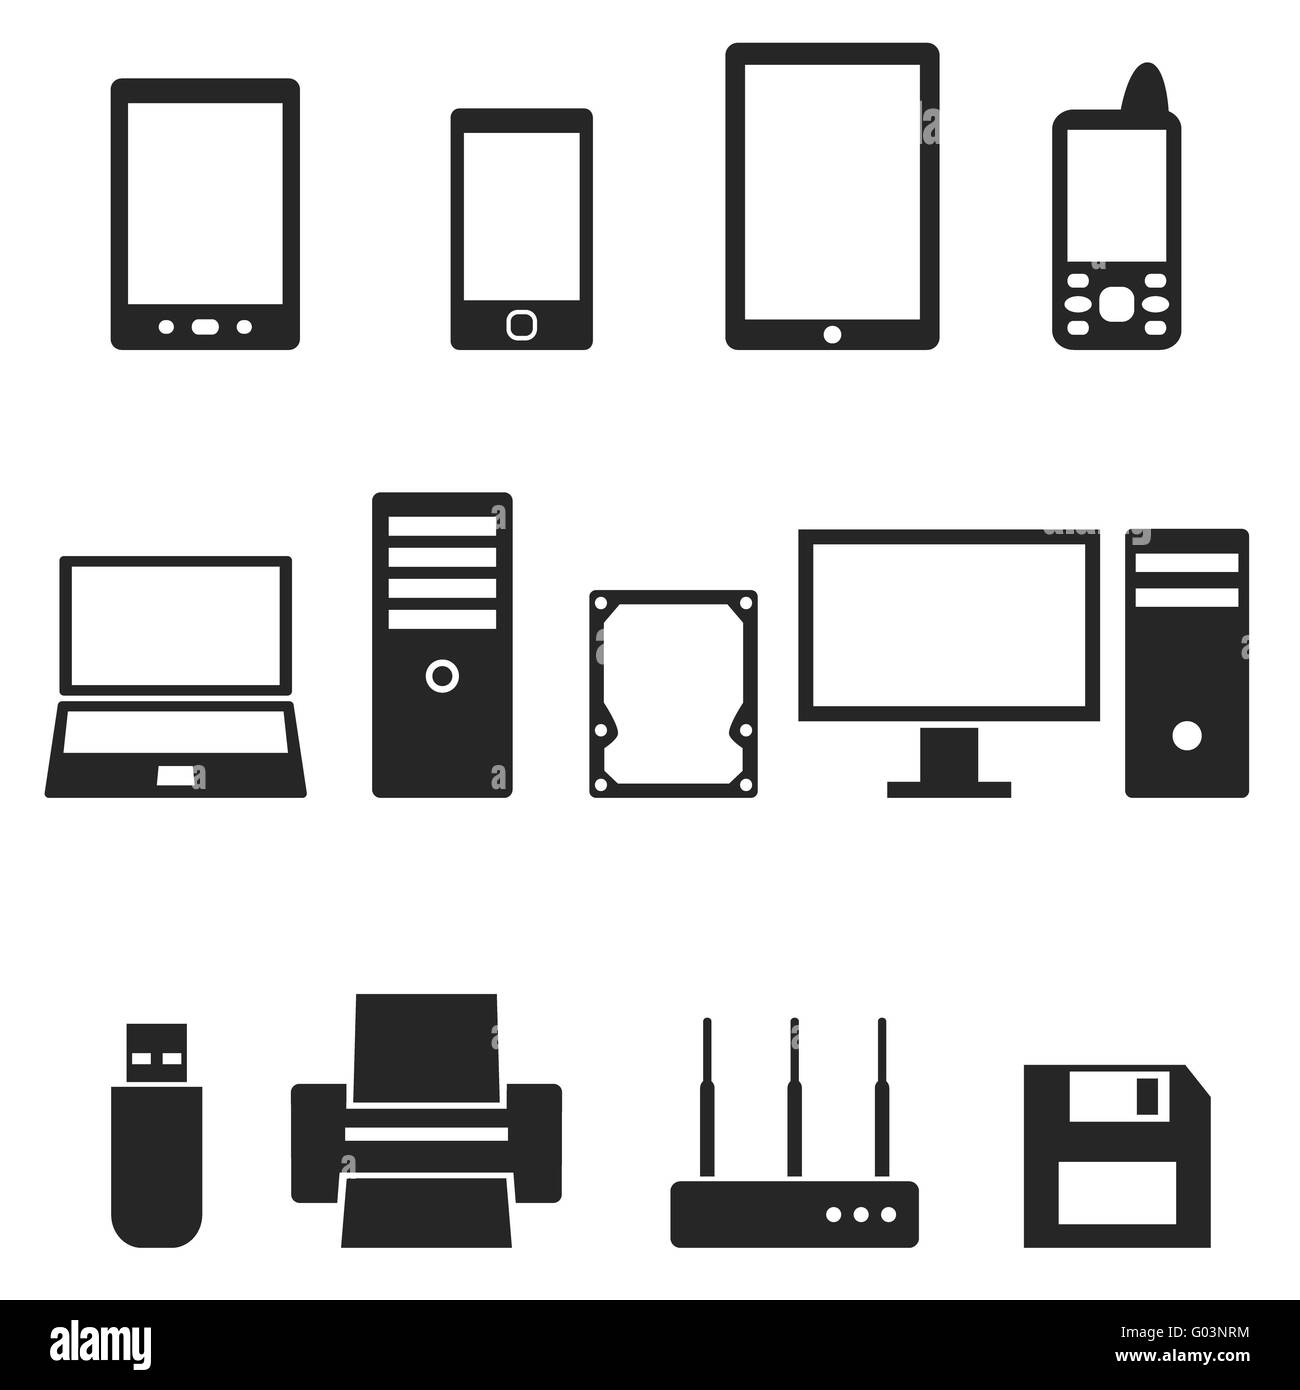 Icons of computer hardware and gadgets in the vector. Stock Photo